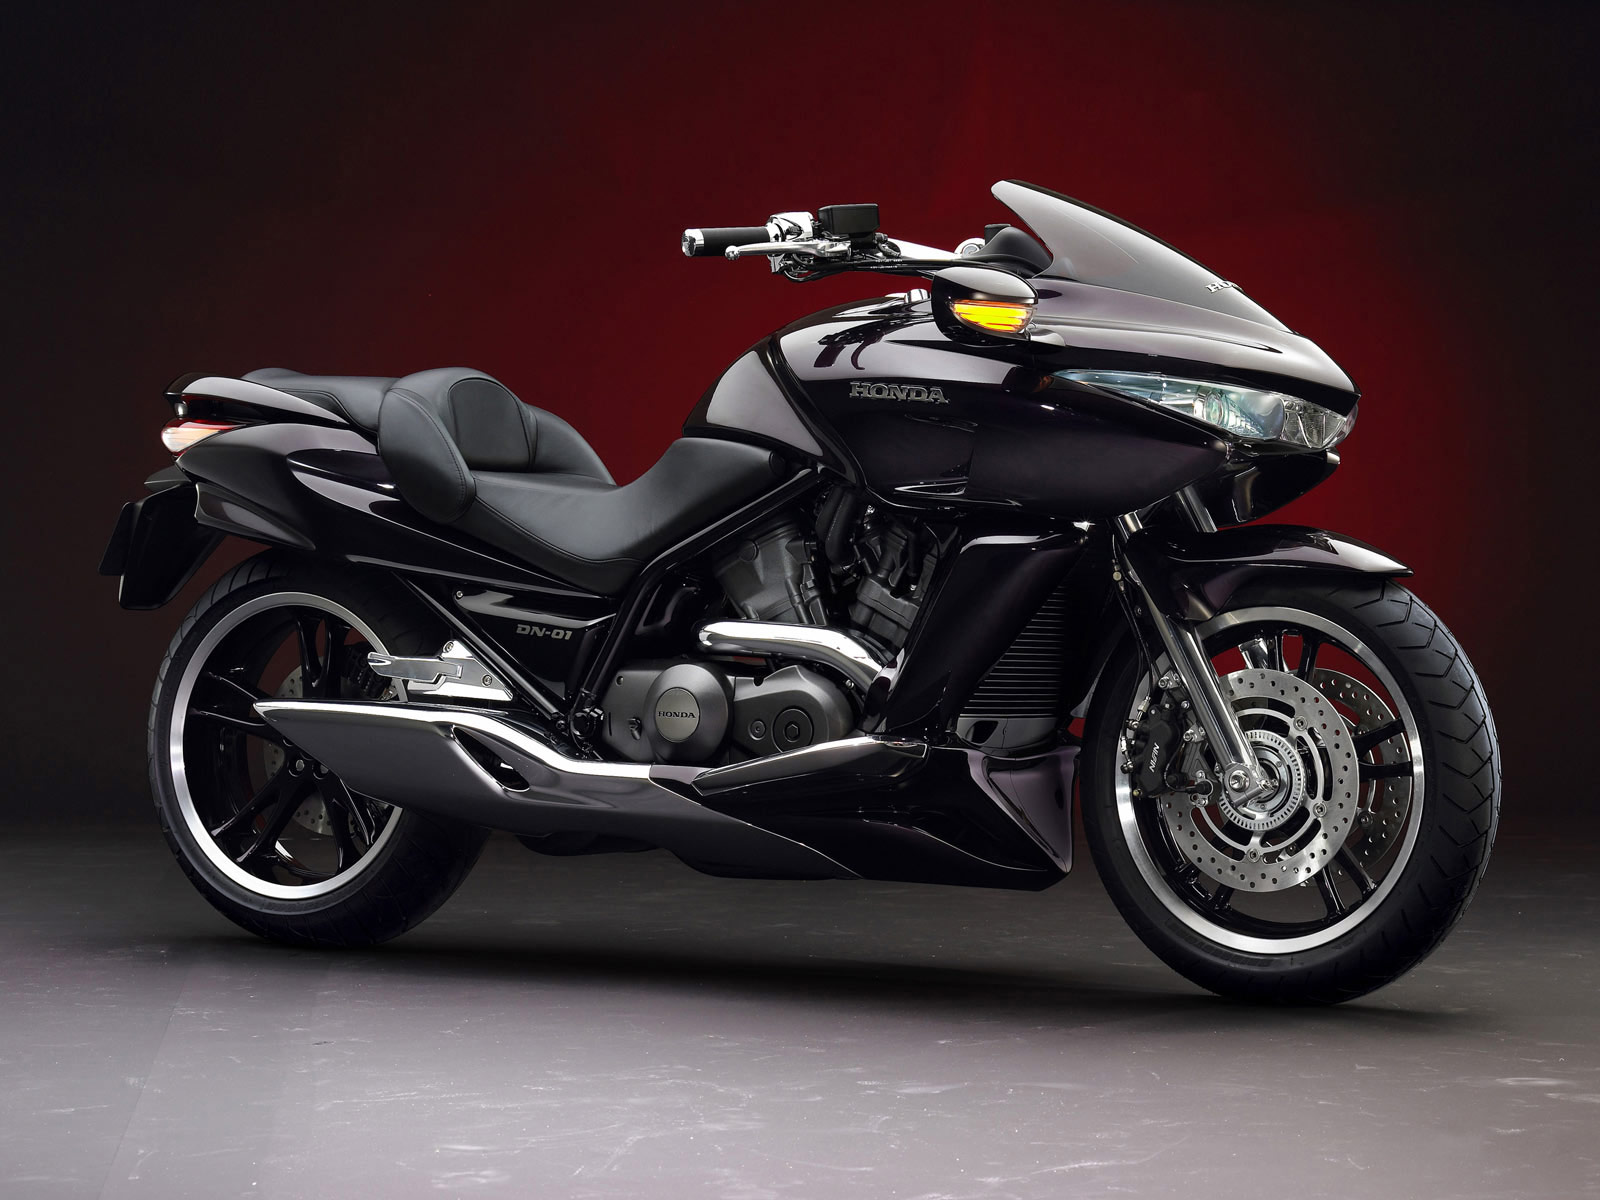 New Motorcycle Info 15 Honda Nm4 Welcome To The Future